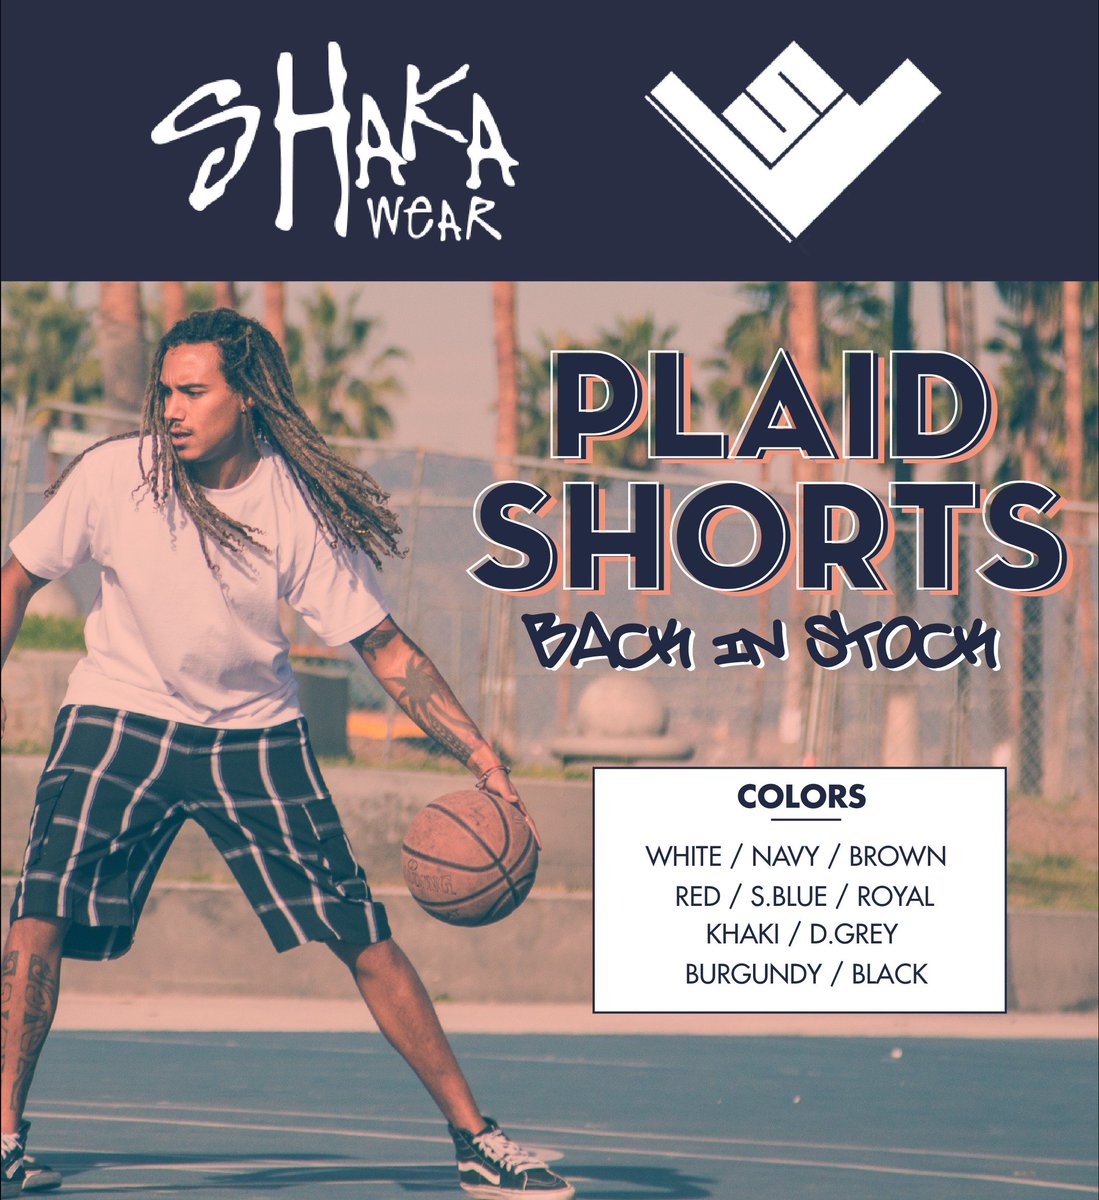 Plaid shorts are back in stock. Get yours now in a variety of colors while supplies last. #plaid #plaidshorts #shakawear #urbanstreetwear